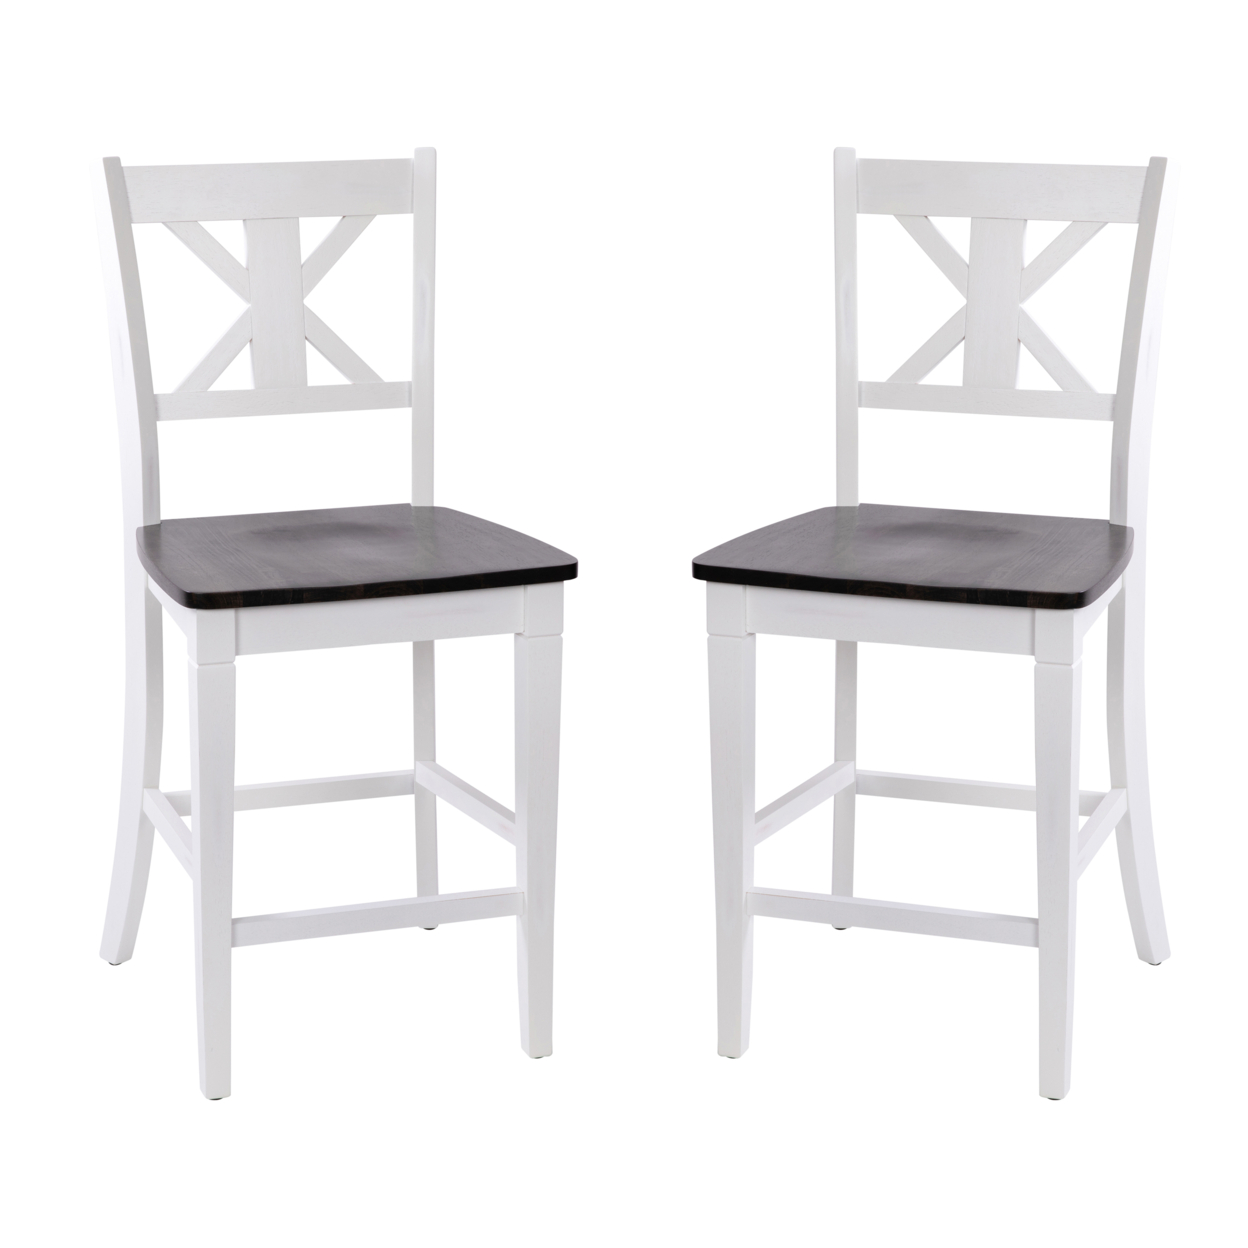 2 Piece Counter Stools, X Design Wood Back, Washed White